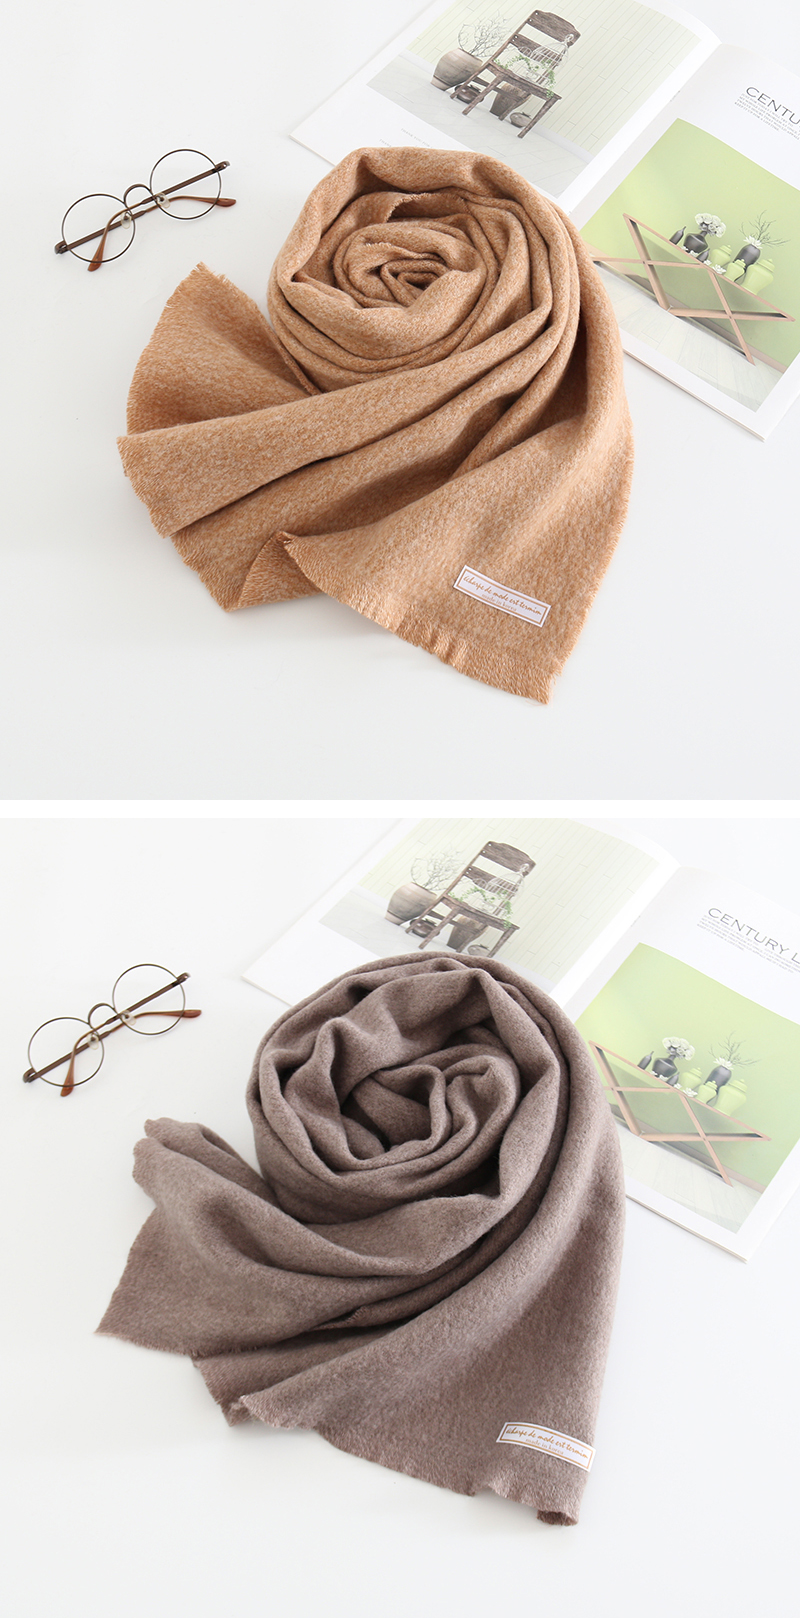 Fashion Jujube Red Letter Clip Flower Monochrome Imitation Cashmere Loose Scarf,Thin Scaves